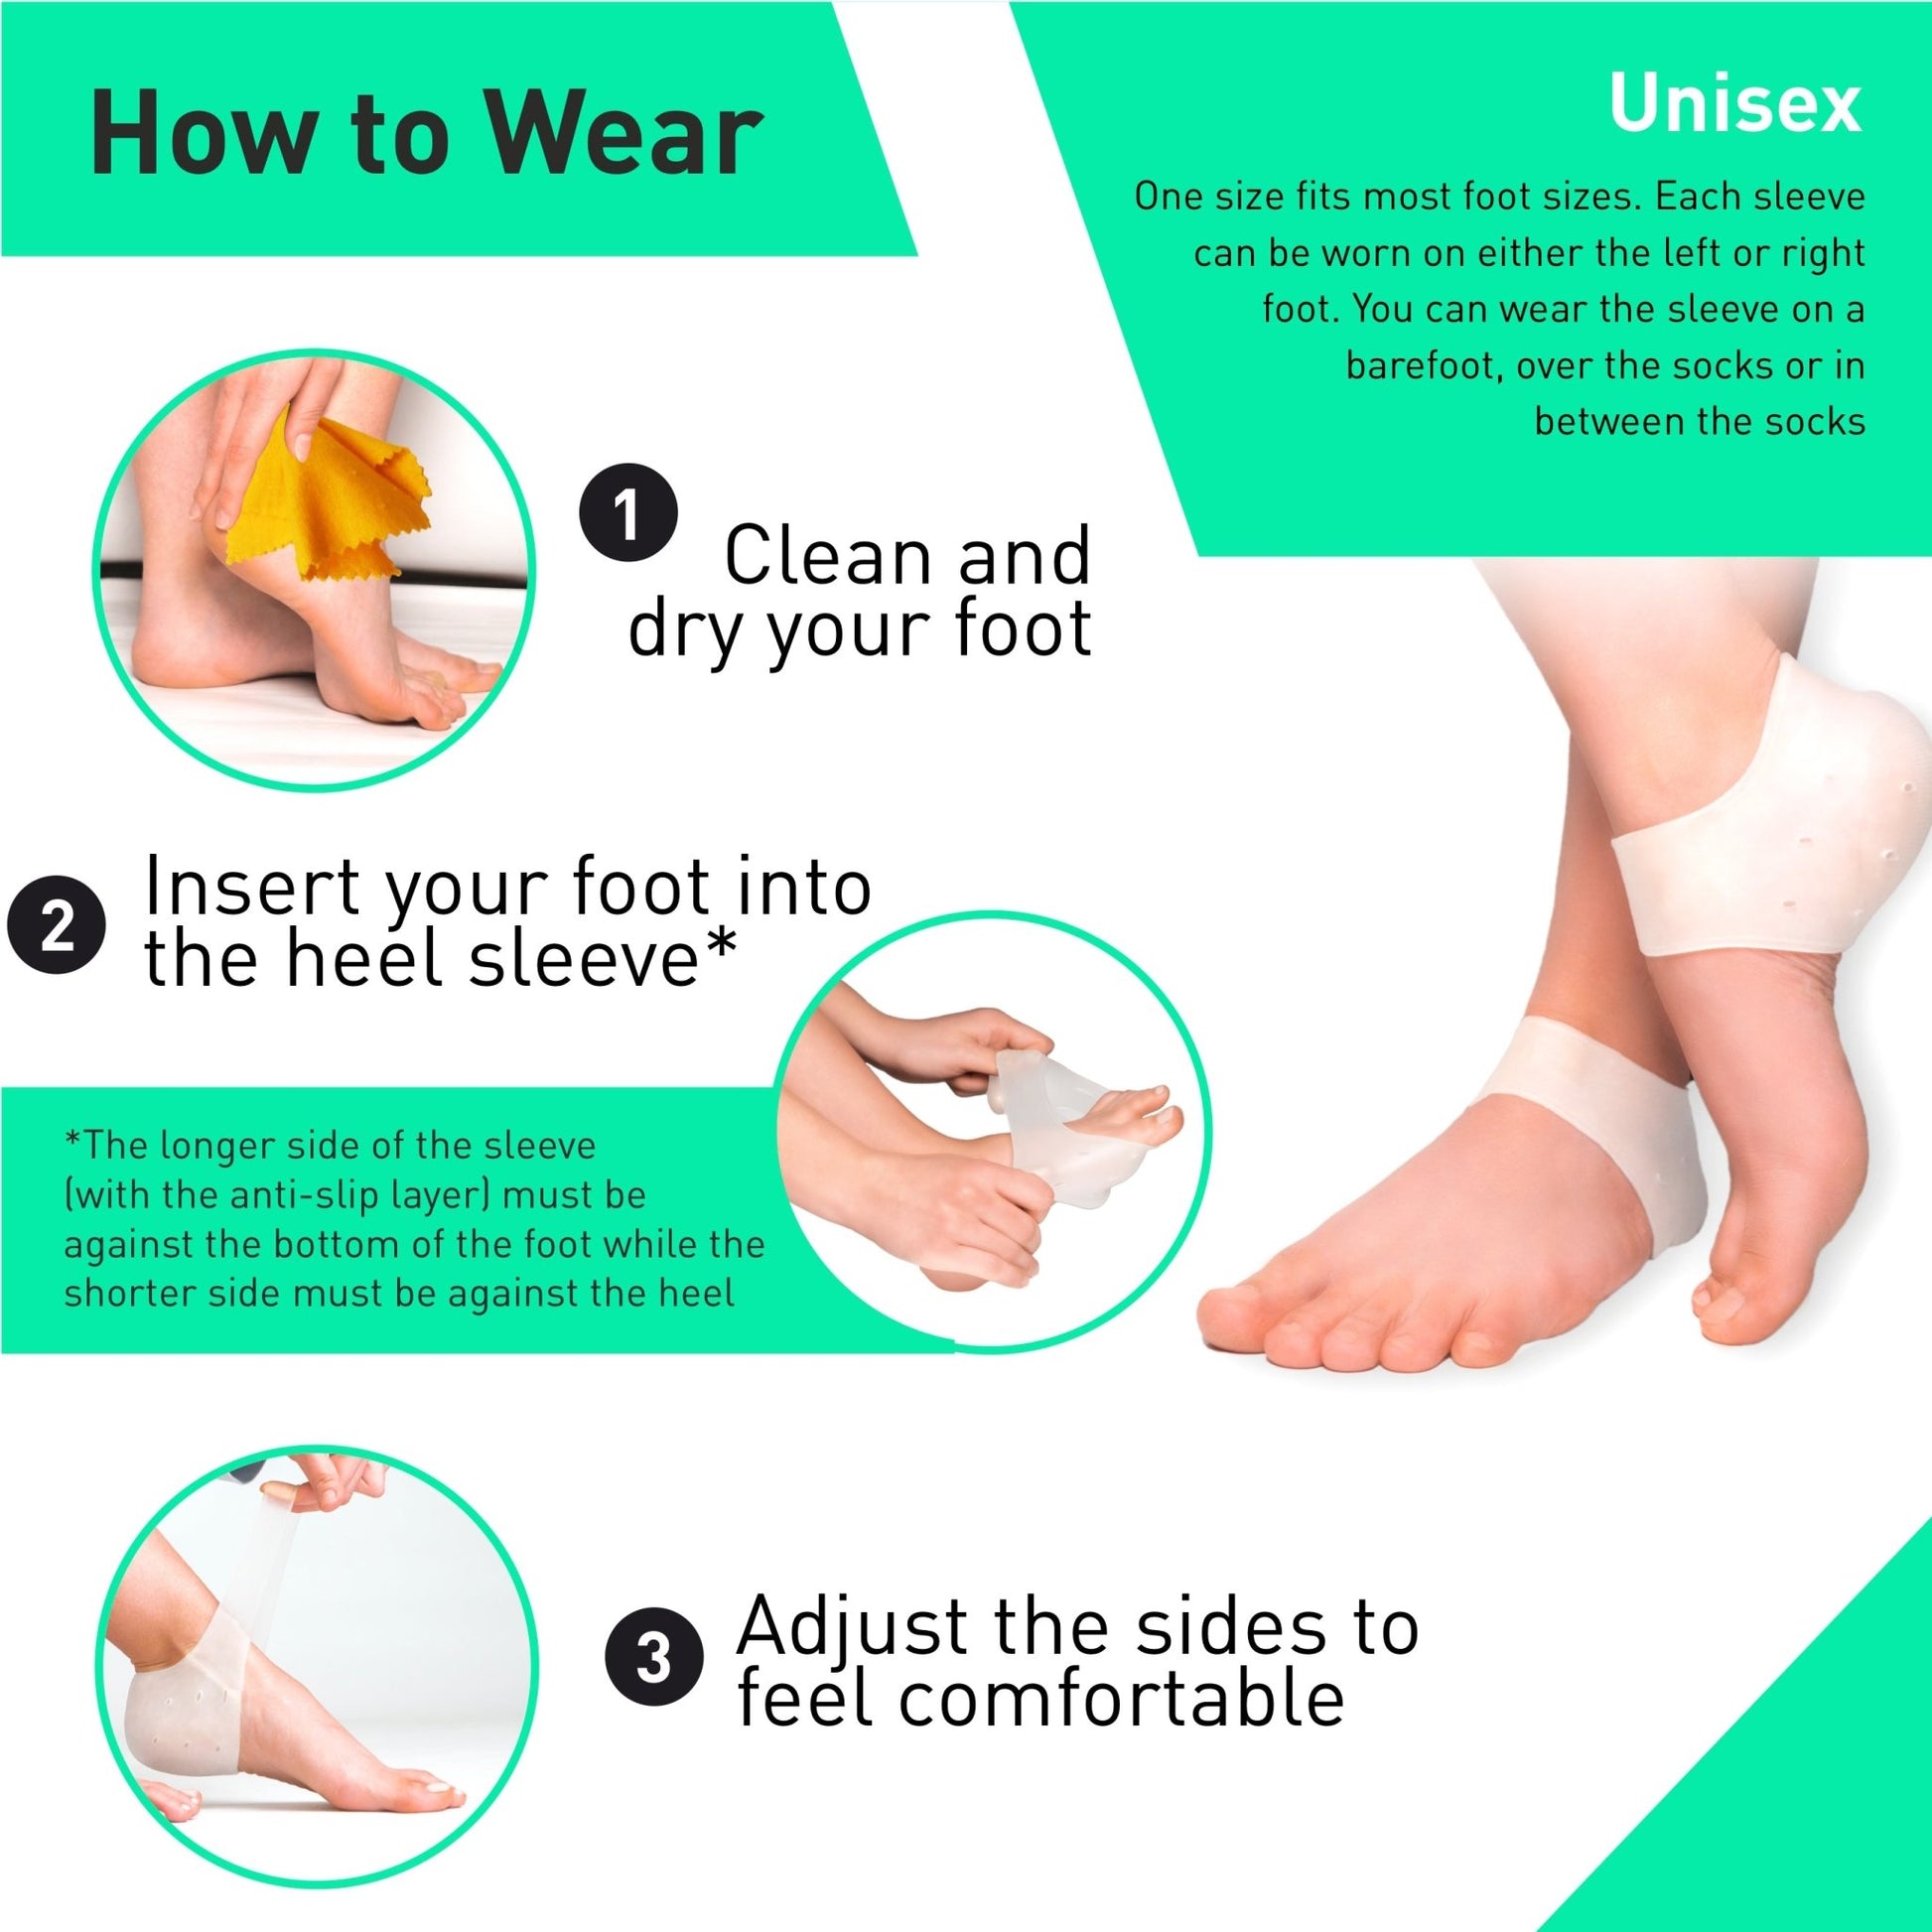 Silicone Heel Protectors (2 Pairs) to Prevent Blisters and Cracked Heels - aZengear